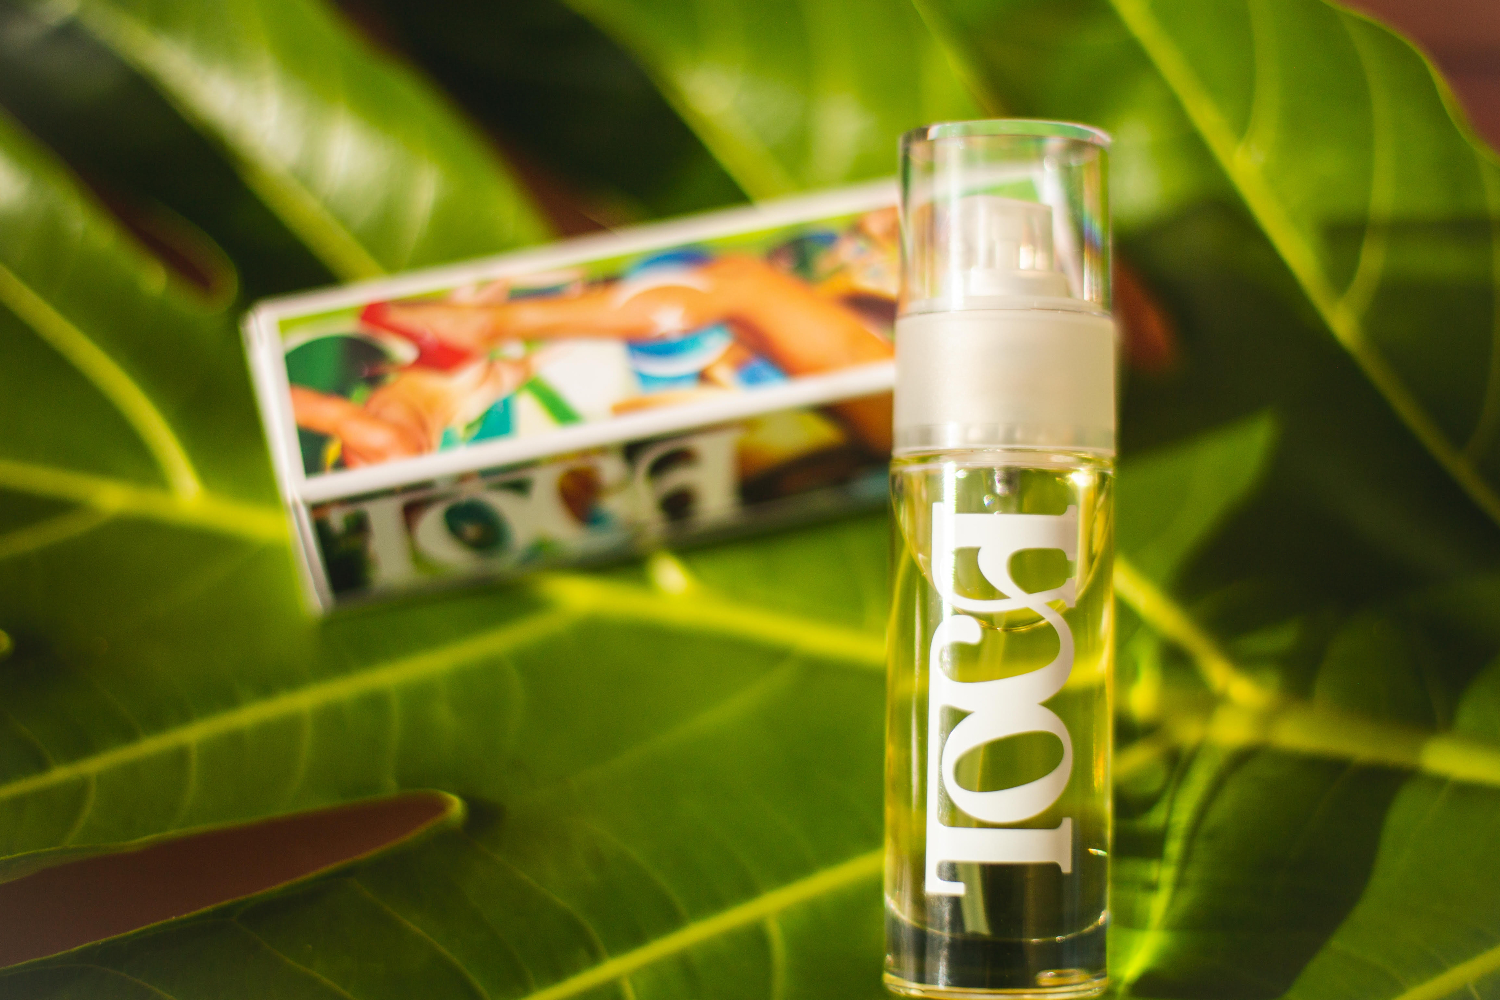 bottle of toca lube on green leafy background